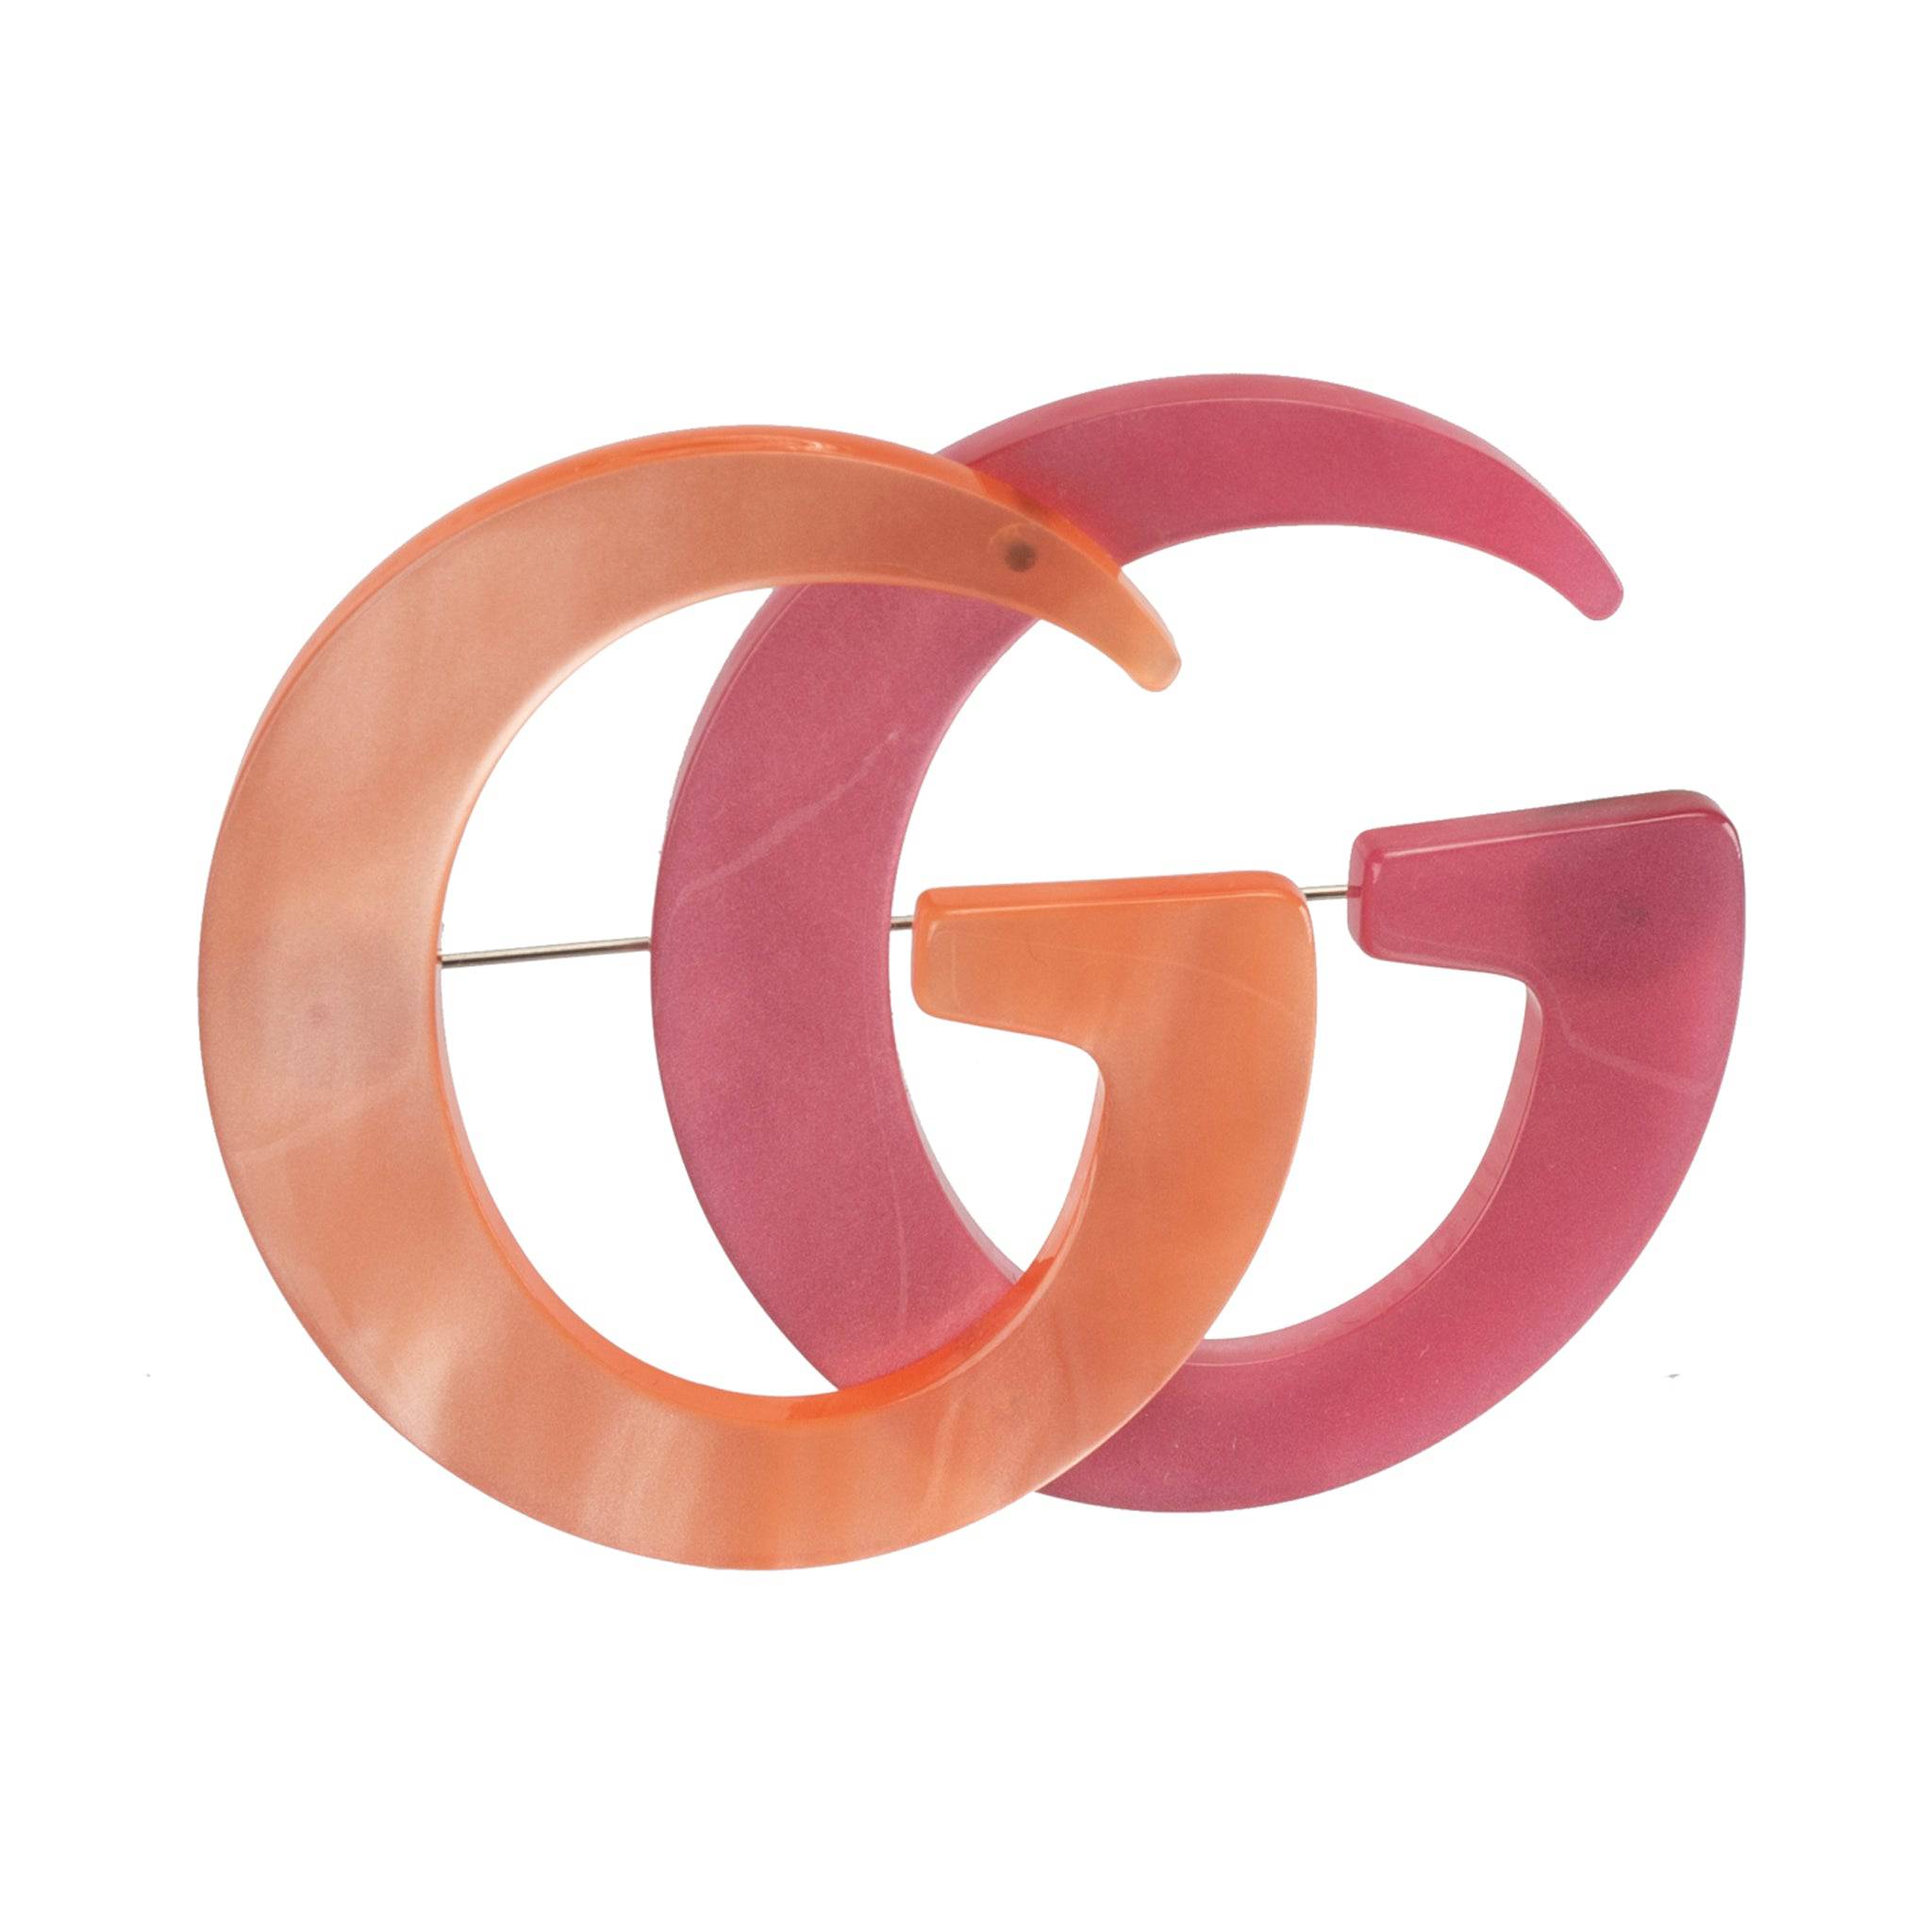 GUCCI RESIN BROOCH PINK & ORANGE - On Repeat